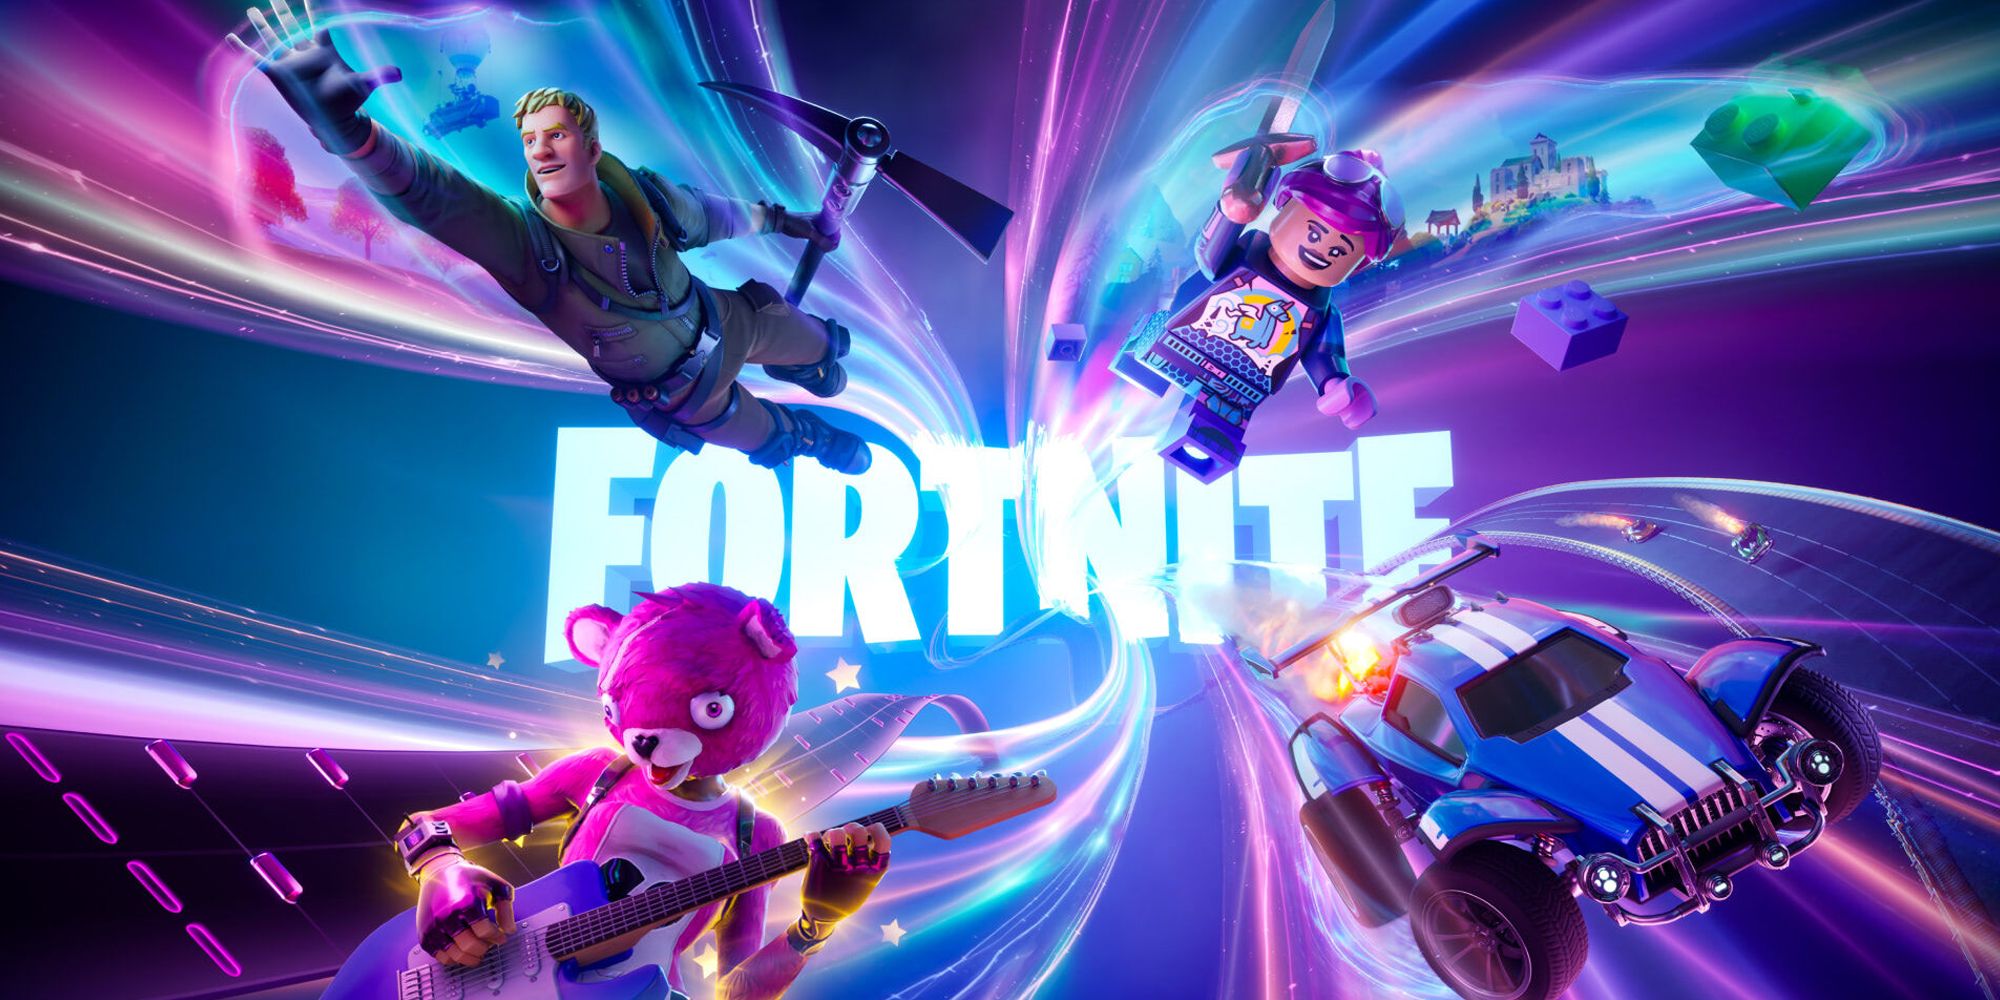 Chapter 4 Season 1 Key Artwork for Fortnite showing three characyers and a car.